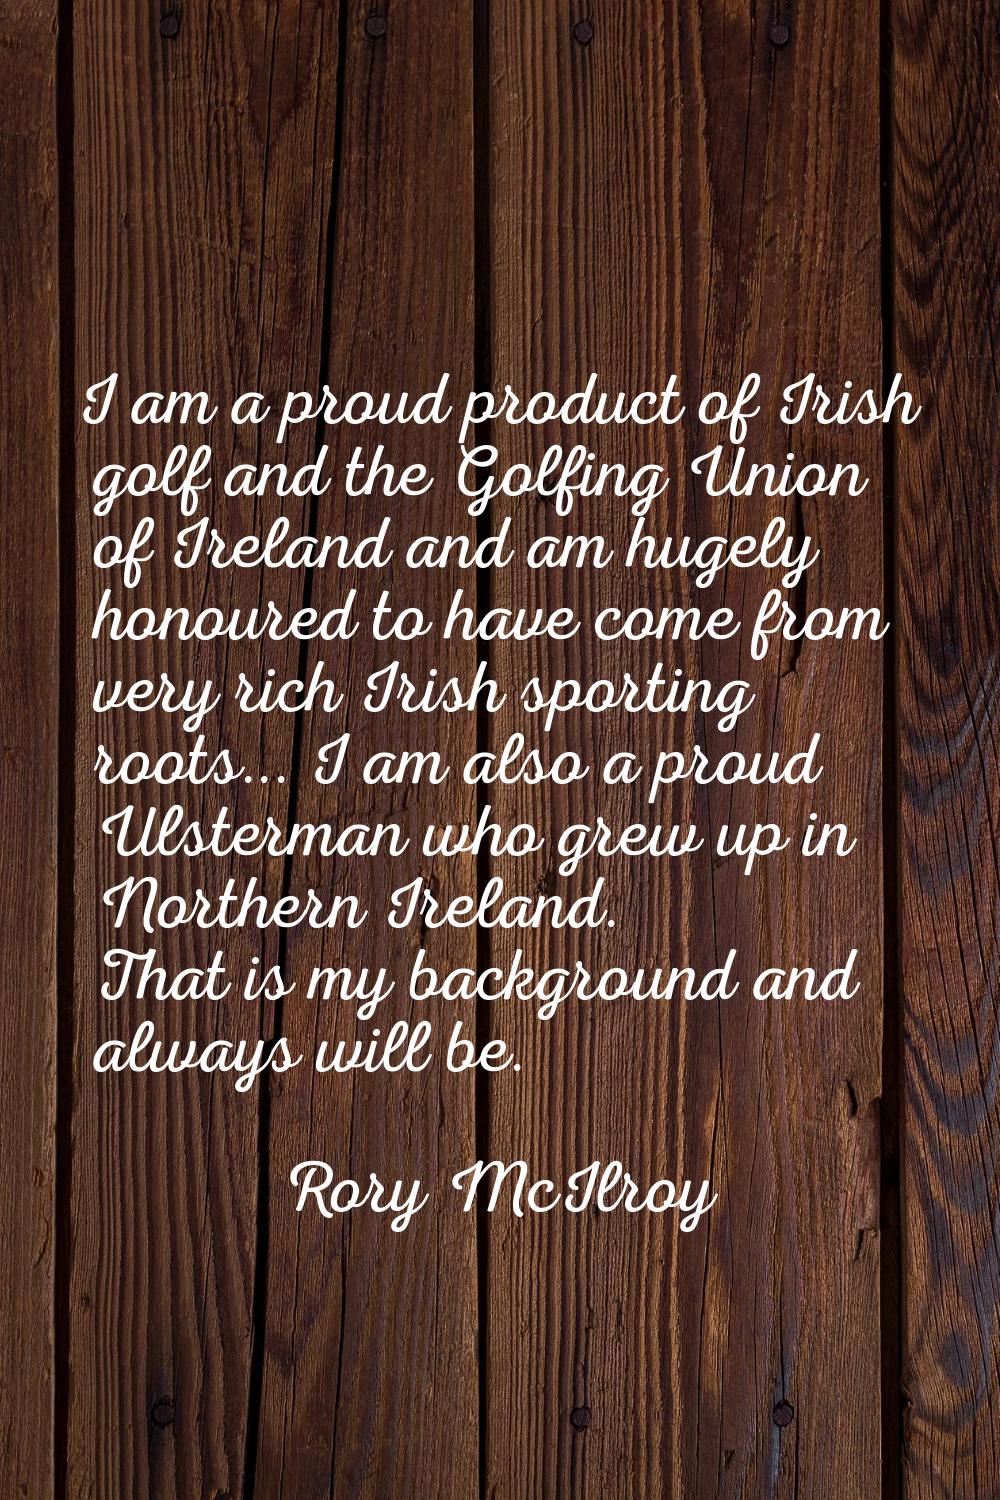 I am a proud product of Irish golf and the Golfing Union of Ireland and am hugely honoured to have 